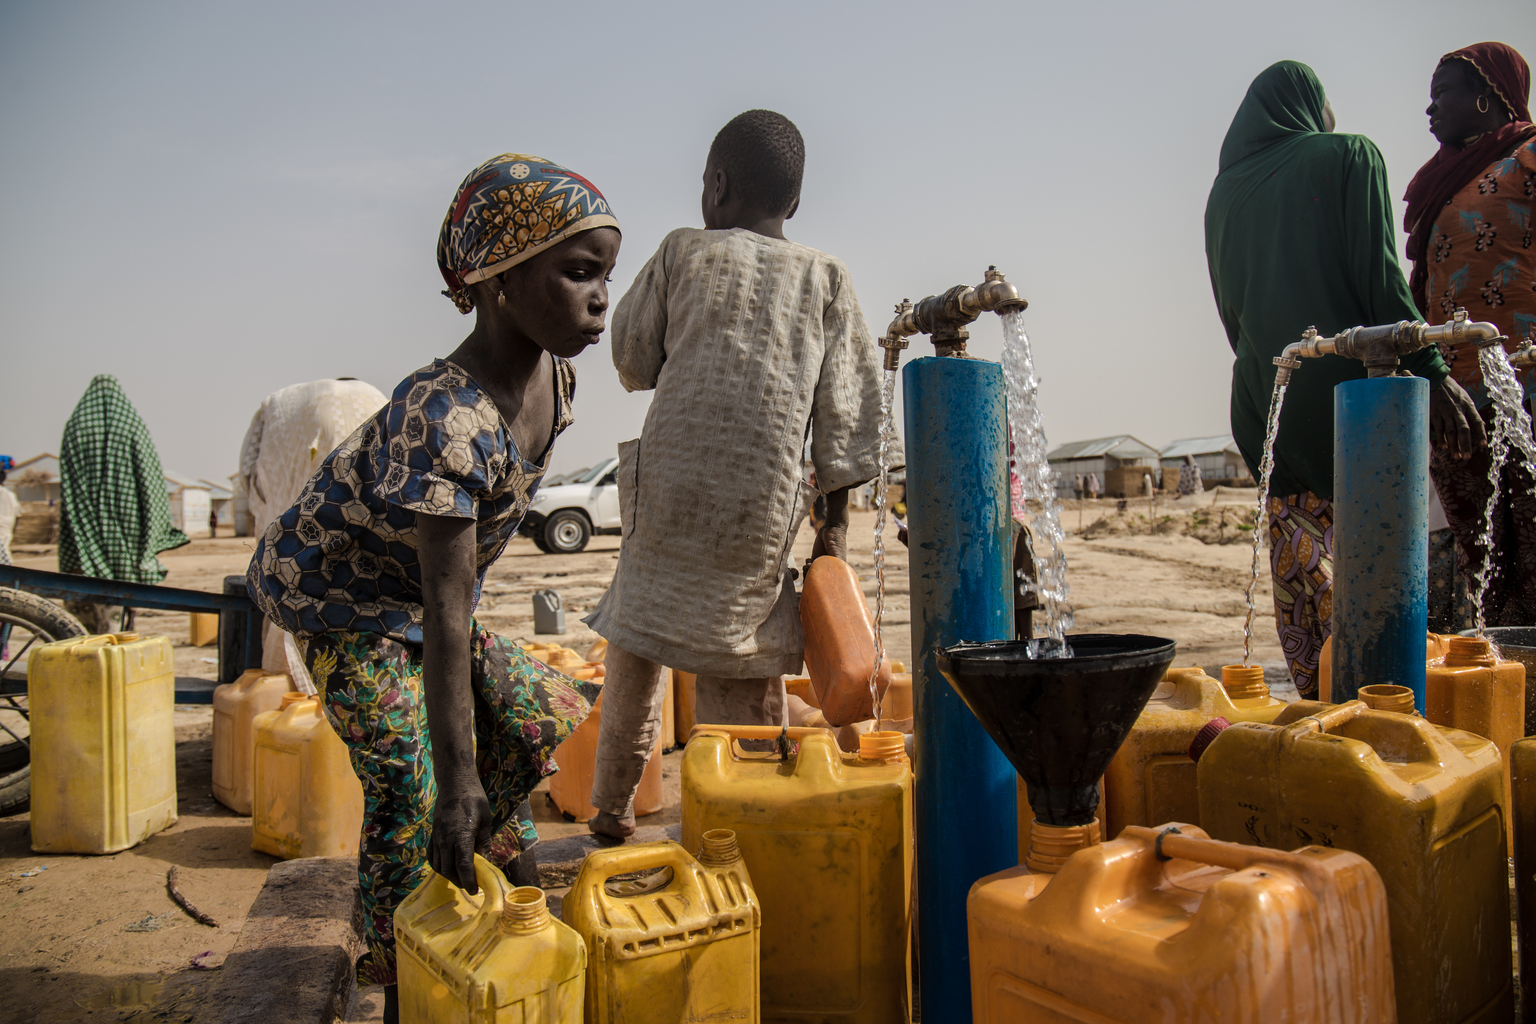 On 13 March 2017, Zara collects water for use at their home in Bakassi IDP camp, in Maiduguri, the capital of Borno State. Four solar powered boreholes with 10,00 litre overhead storage for each borehole and 60 water taps are servicing 21,000 Internally Displaced Persons from Gwoza, Marte, Monguno LGAs. The prolonged humanitarian crisis in the wake of the Boko Haram insurgency has had a devastating impact on food security and nutrition in northeast Nigeria, leading to famine-like conditions in some areas, according to a World Food Programme (WFP) situation report from late February 2017. The United Nations Office for the Coordination of Humanitarian Affairs (OCHA) projects that by June 2017 some 5.1 million people in Nigeria will be food insecure at crisis and emergency levels. In 2017 in northeast Nigeria, in Borno, Adamawa and Yobe, the three states most directly affected by conflict, 75 per cent of water and sanitation infrastructure in conflict-affected areas has been damaged or destroyed, leaving 3.8 million people with no access to safe water. Displaced families are putting enormous pressure on already strained health and water systems in host communities. With the ongoing disruption to basic services the likelihood of waterborne diseases, such as diarrhoea and cholera, is growing and children are worst hit in such conditions leading to increase malnutrition and mortality. One third of the 700 health facilities in the hardest-hit state of Borno have been completely destroyed and a similar number are non-functional. As at 15 March 2017, over the past 12 months, UNICEF and partners have provided safe water to nearly 666,000 people and treated nearly 170,000 children suffering from severe acute malnutrition in the three conflict-affected northeast Nigerian states of Borno, Yobe and Adamawa. As part of cholera preparedness, UNICEF and other WASH Sector partners are building the capacity of government and NGOs on cholera response and developing contingency plan